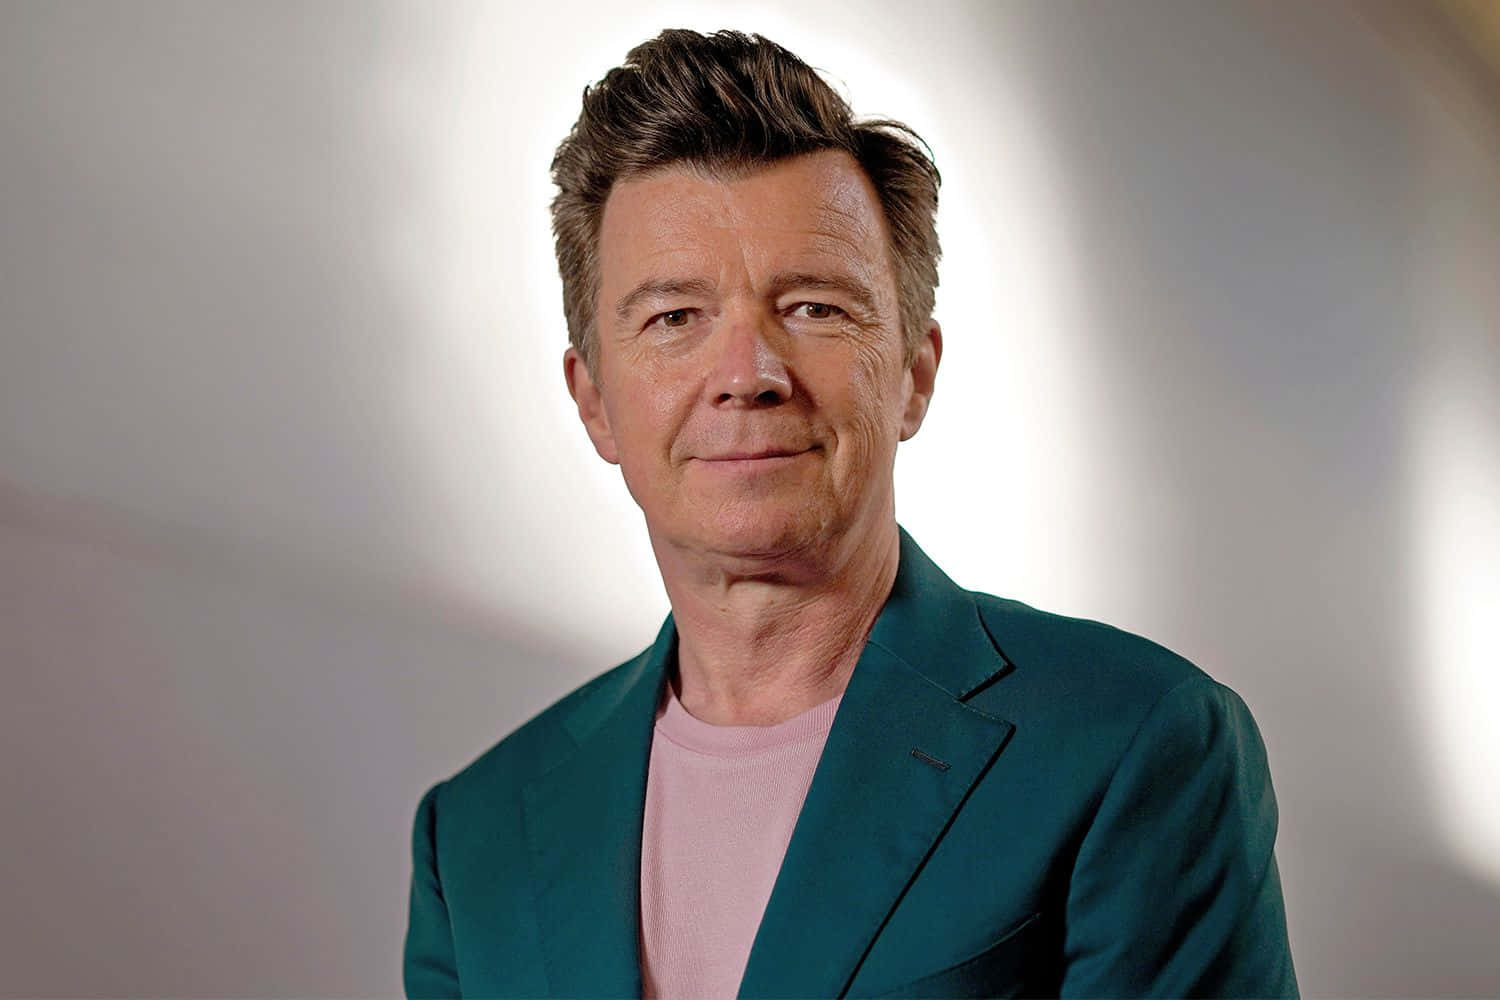 Iconic Singer Rick Astley At A Performance